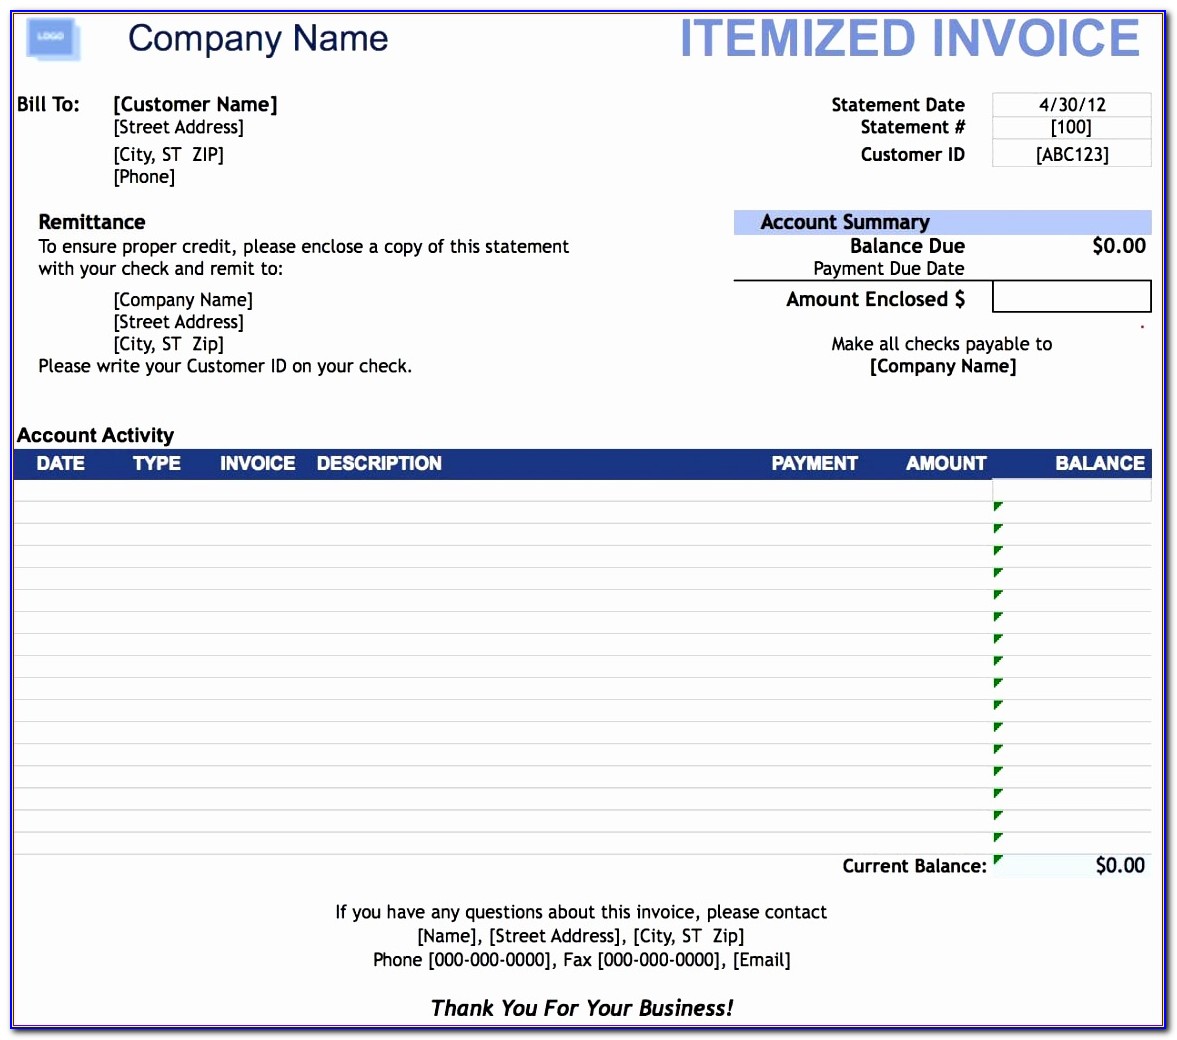 Itemized Invoice Template Excel